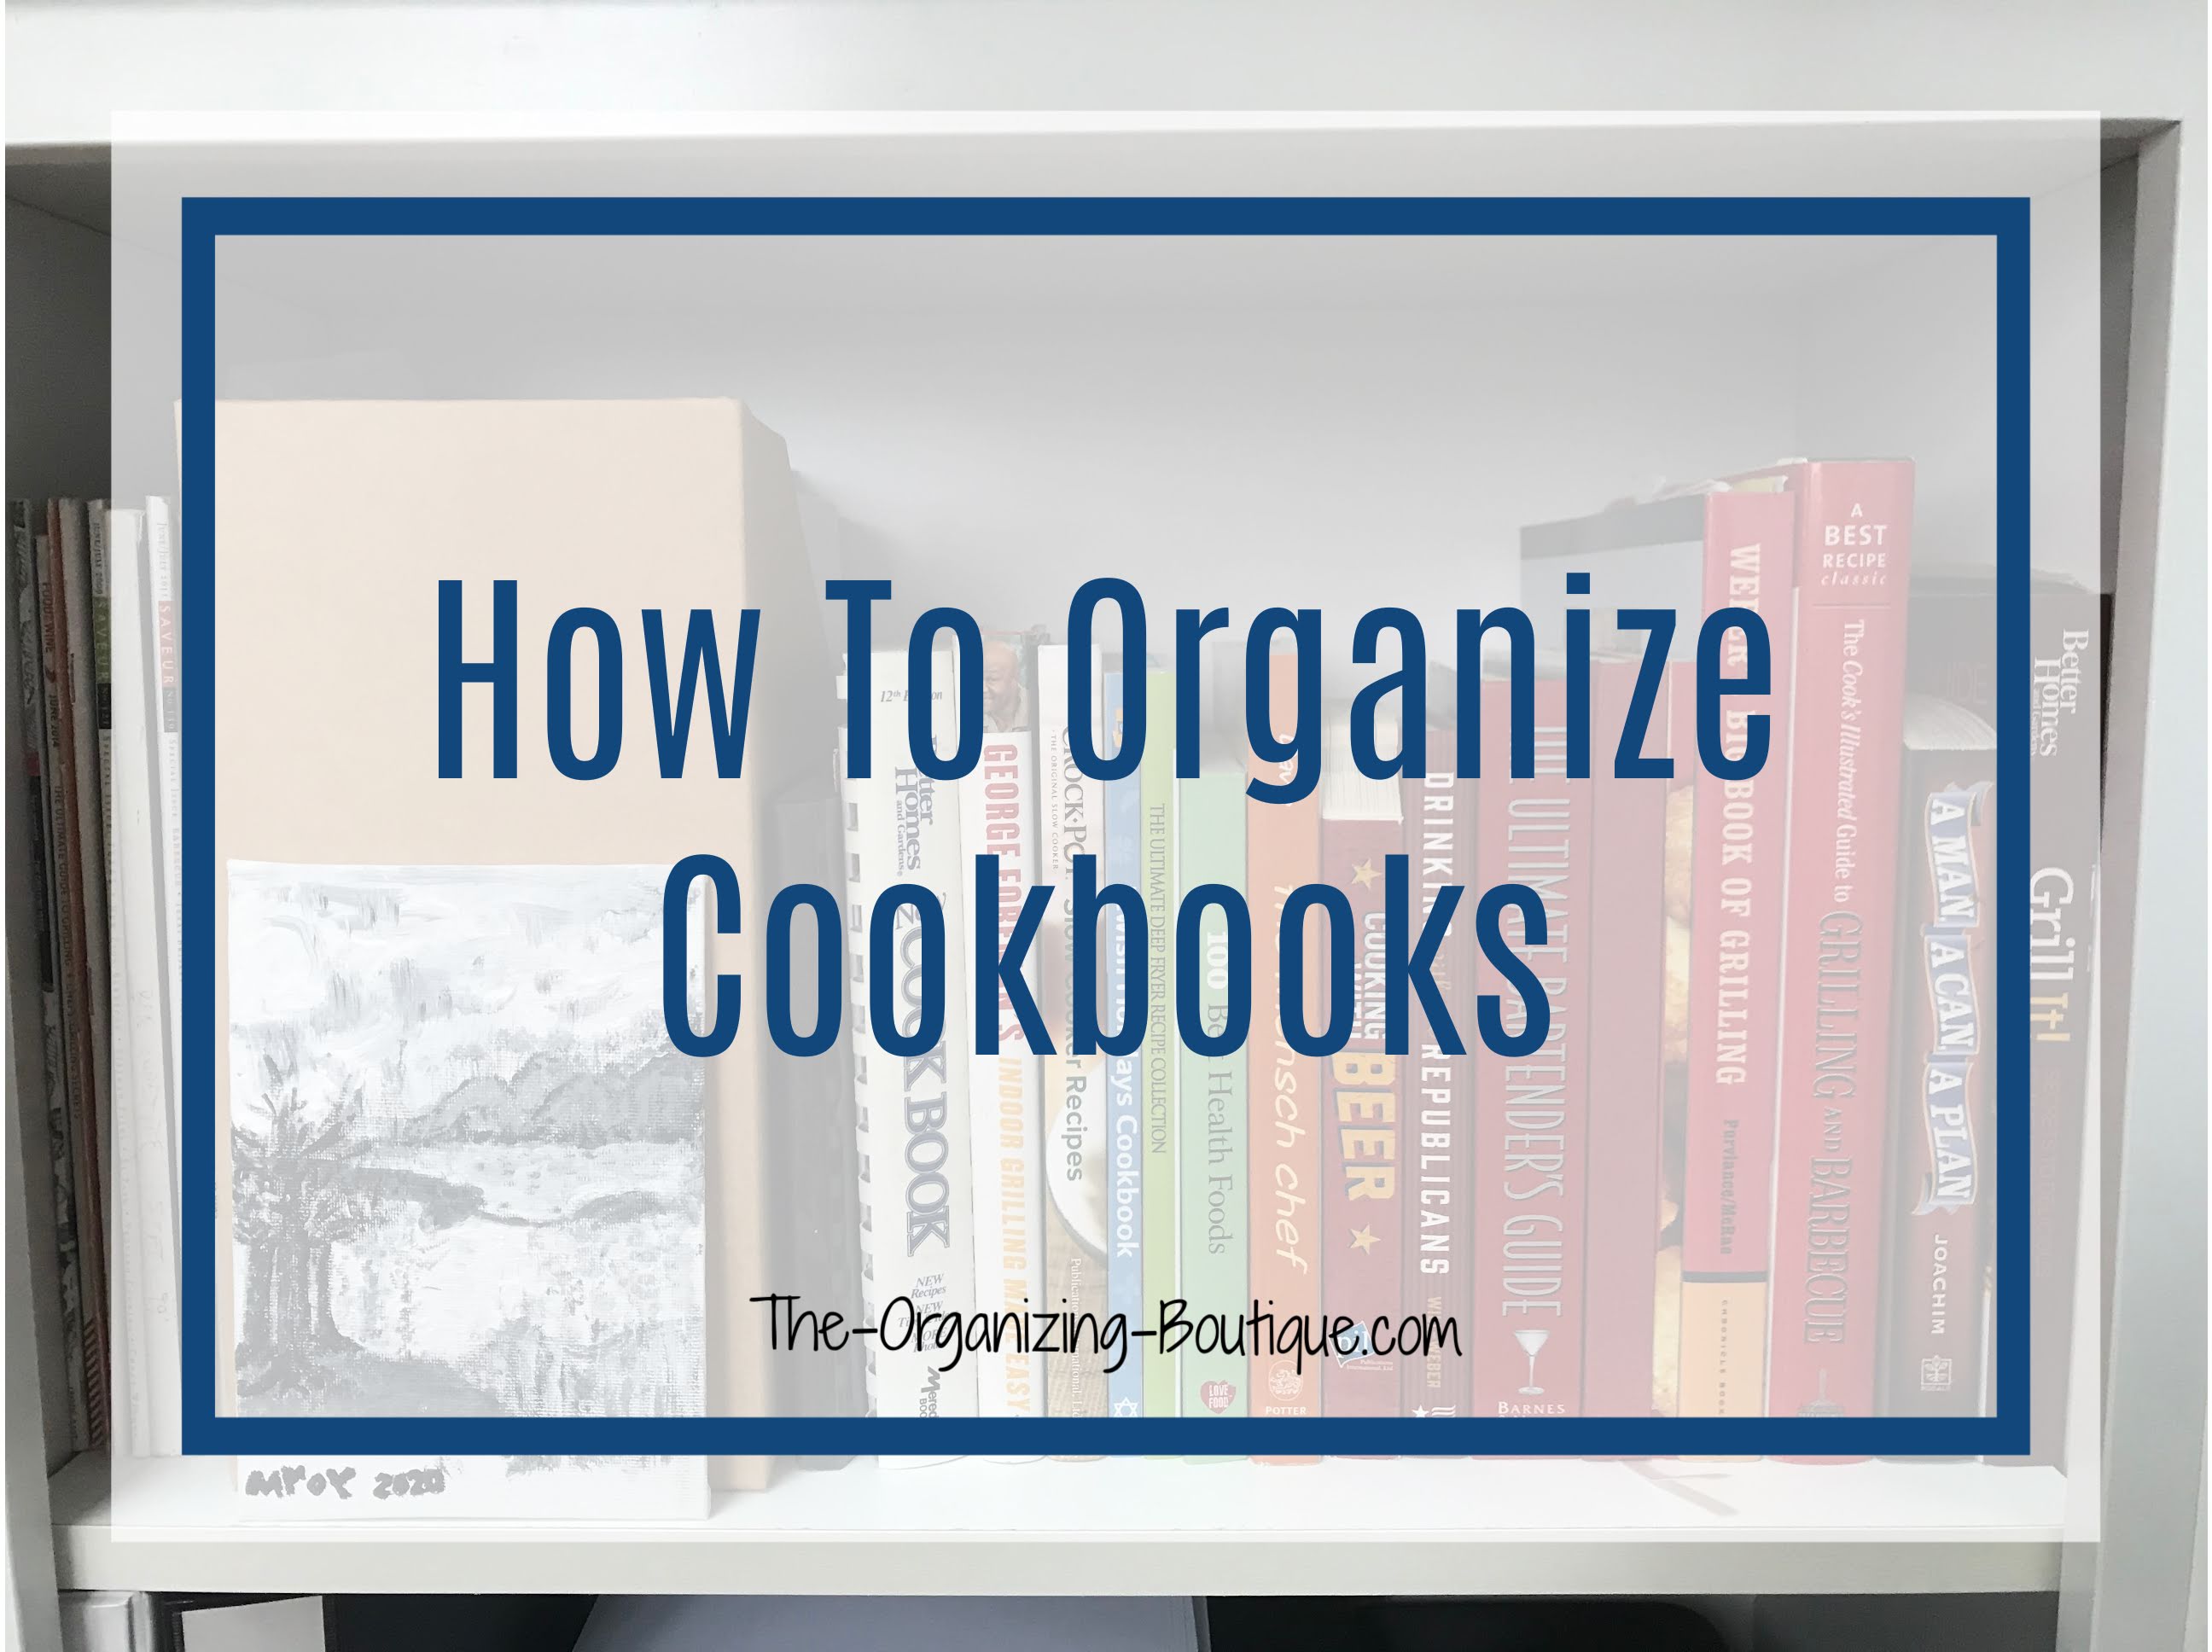 Want some cookbook storage ideas and tips on how to organize recipes? Here they are!